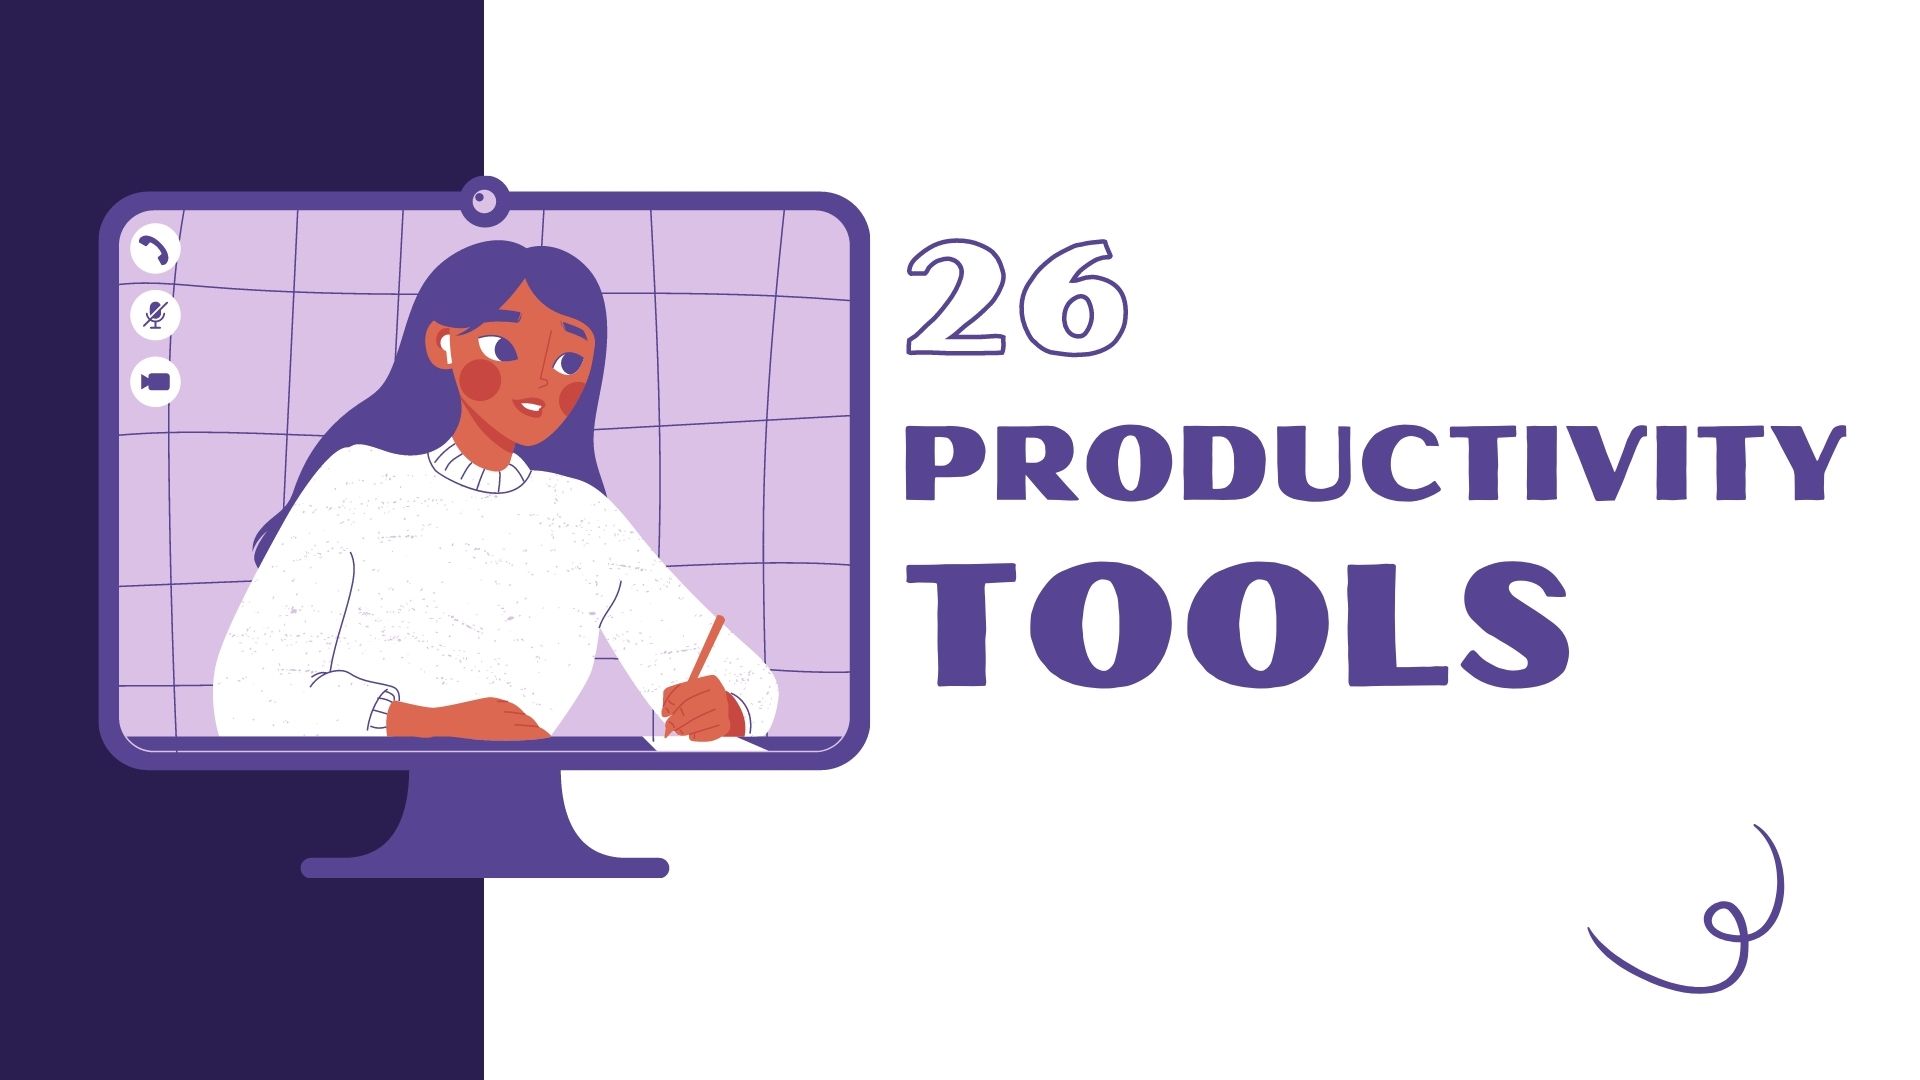 Top 26 Productivity Tools 2022 to Help You Get More Done in Less Time!